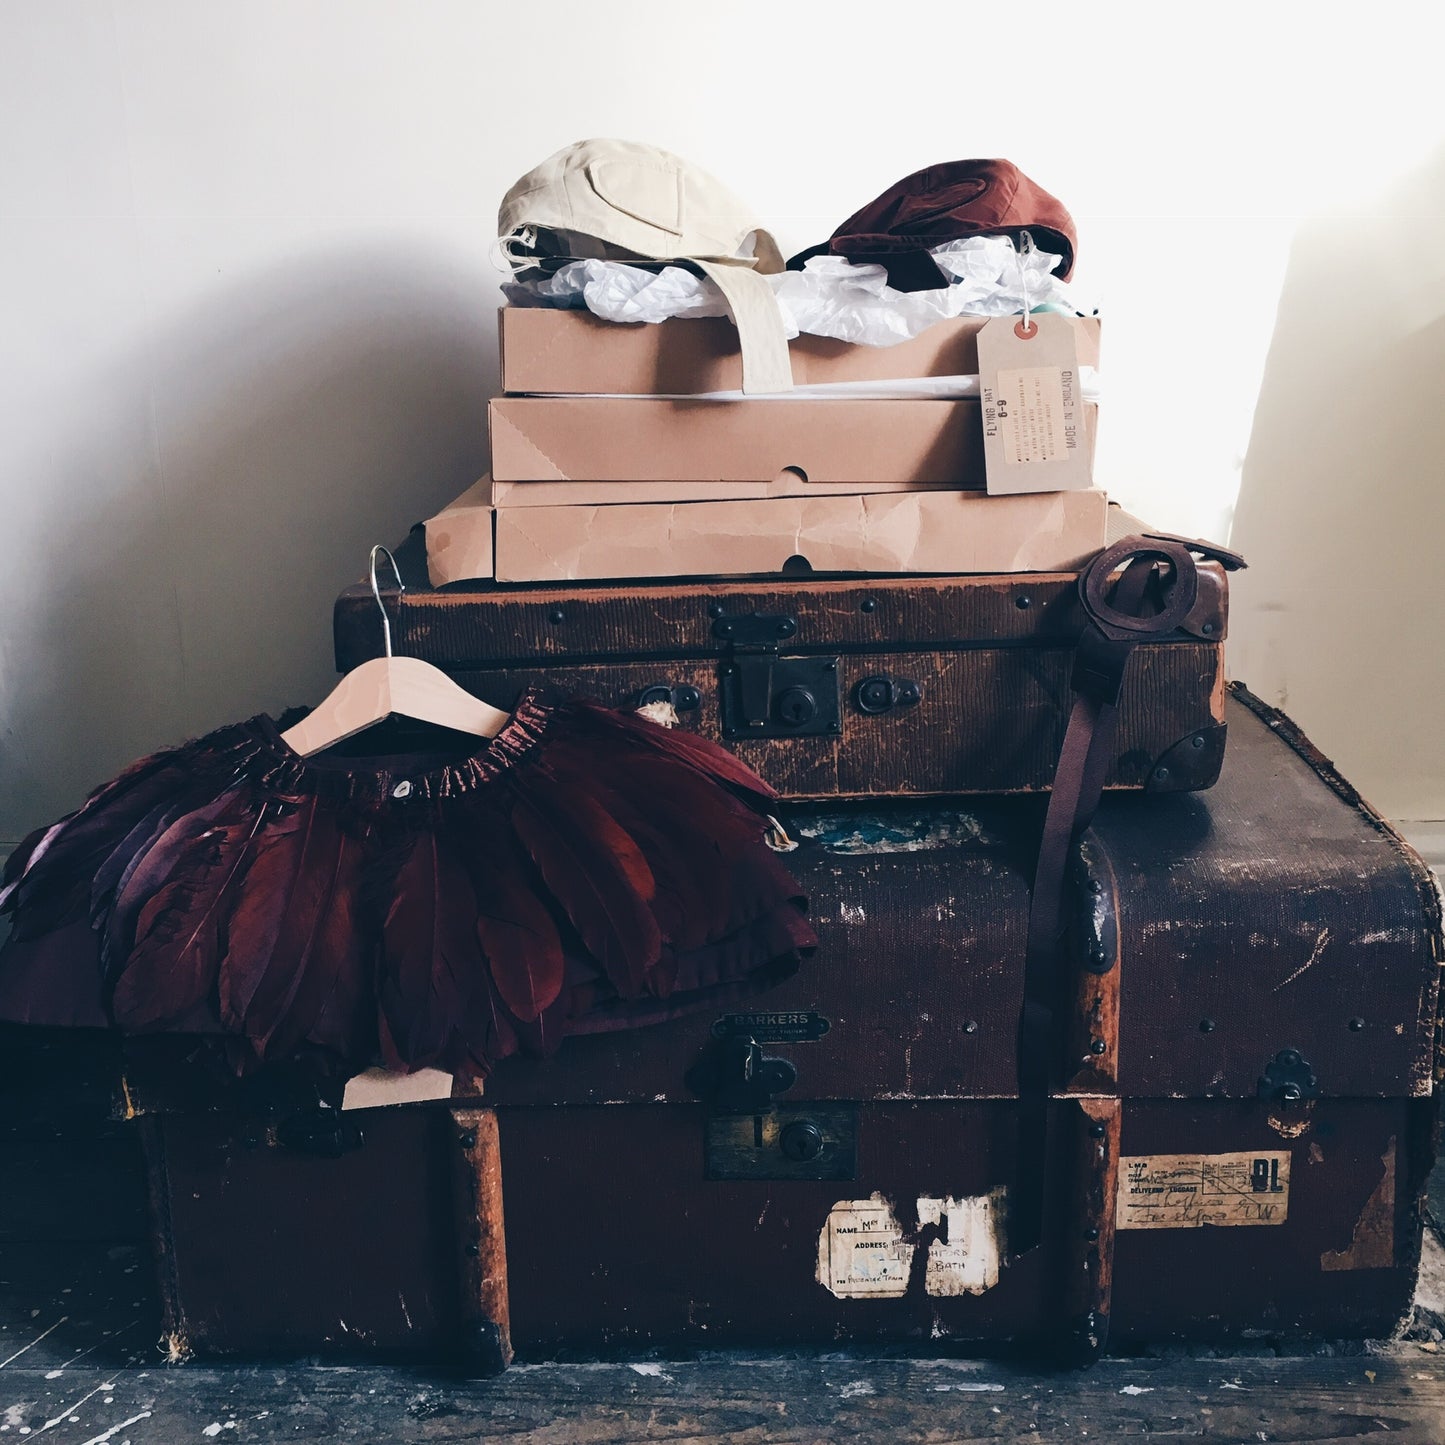 A brown feather cape, brown leather flying goggles & two flying hats styled on Vintage luggage.